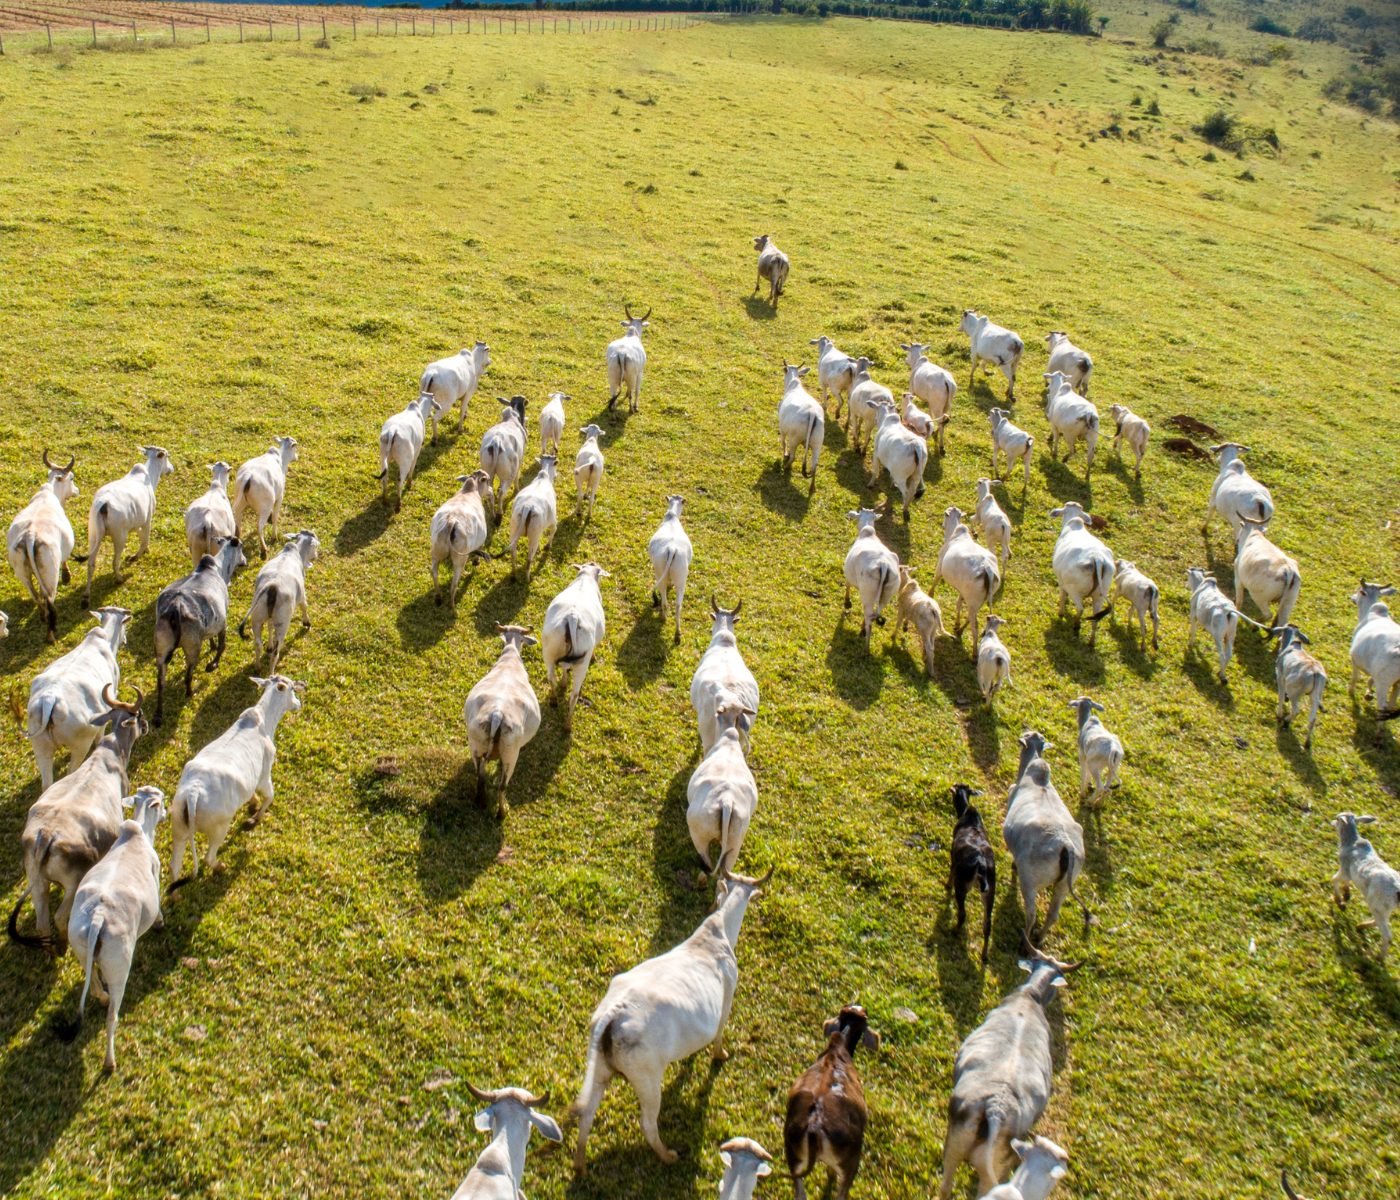 UN Report: Overuse and Climate Degrade Half of World’s Pastures